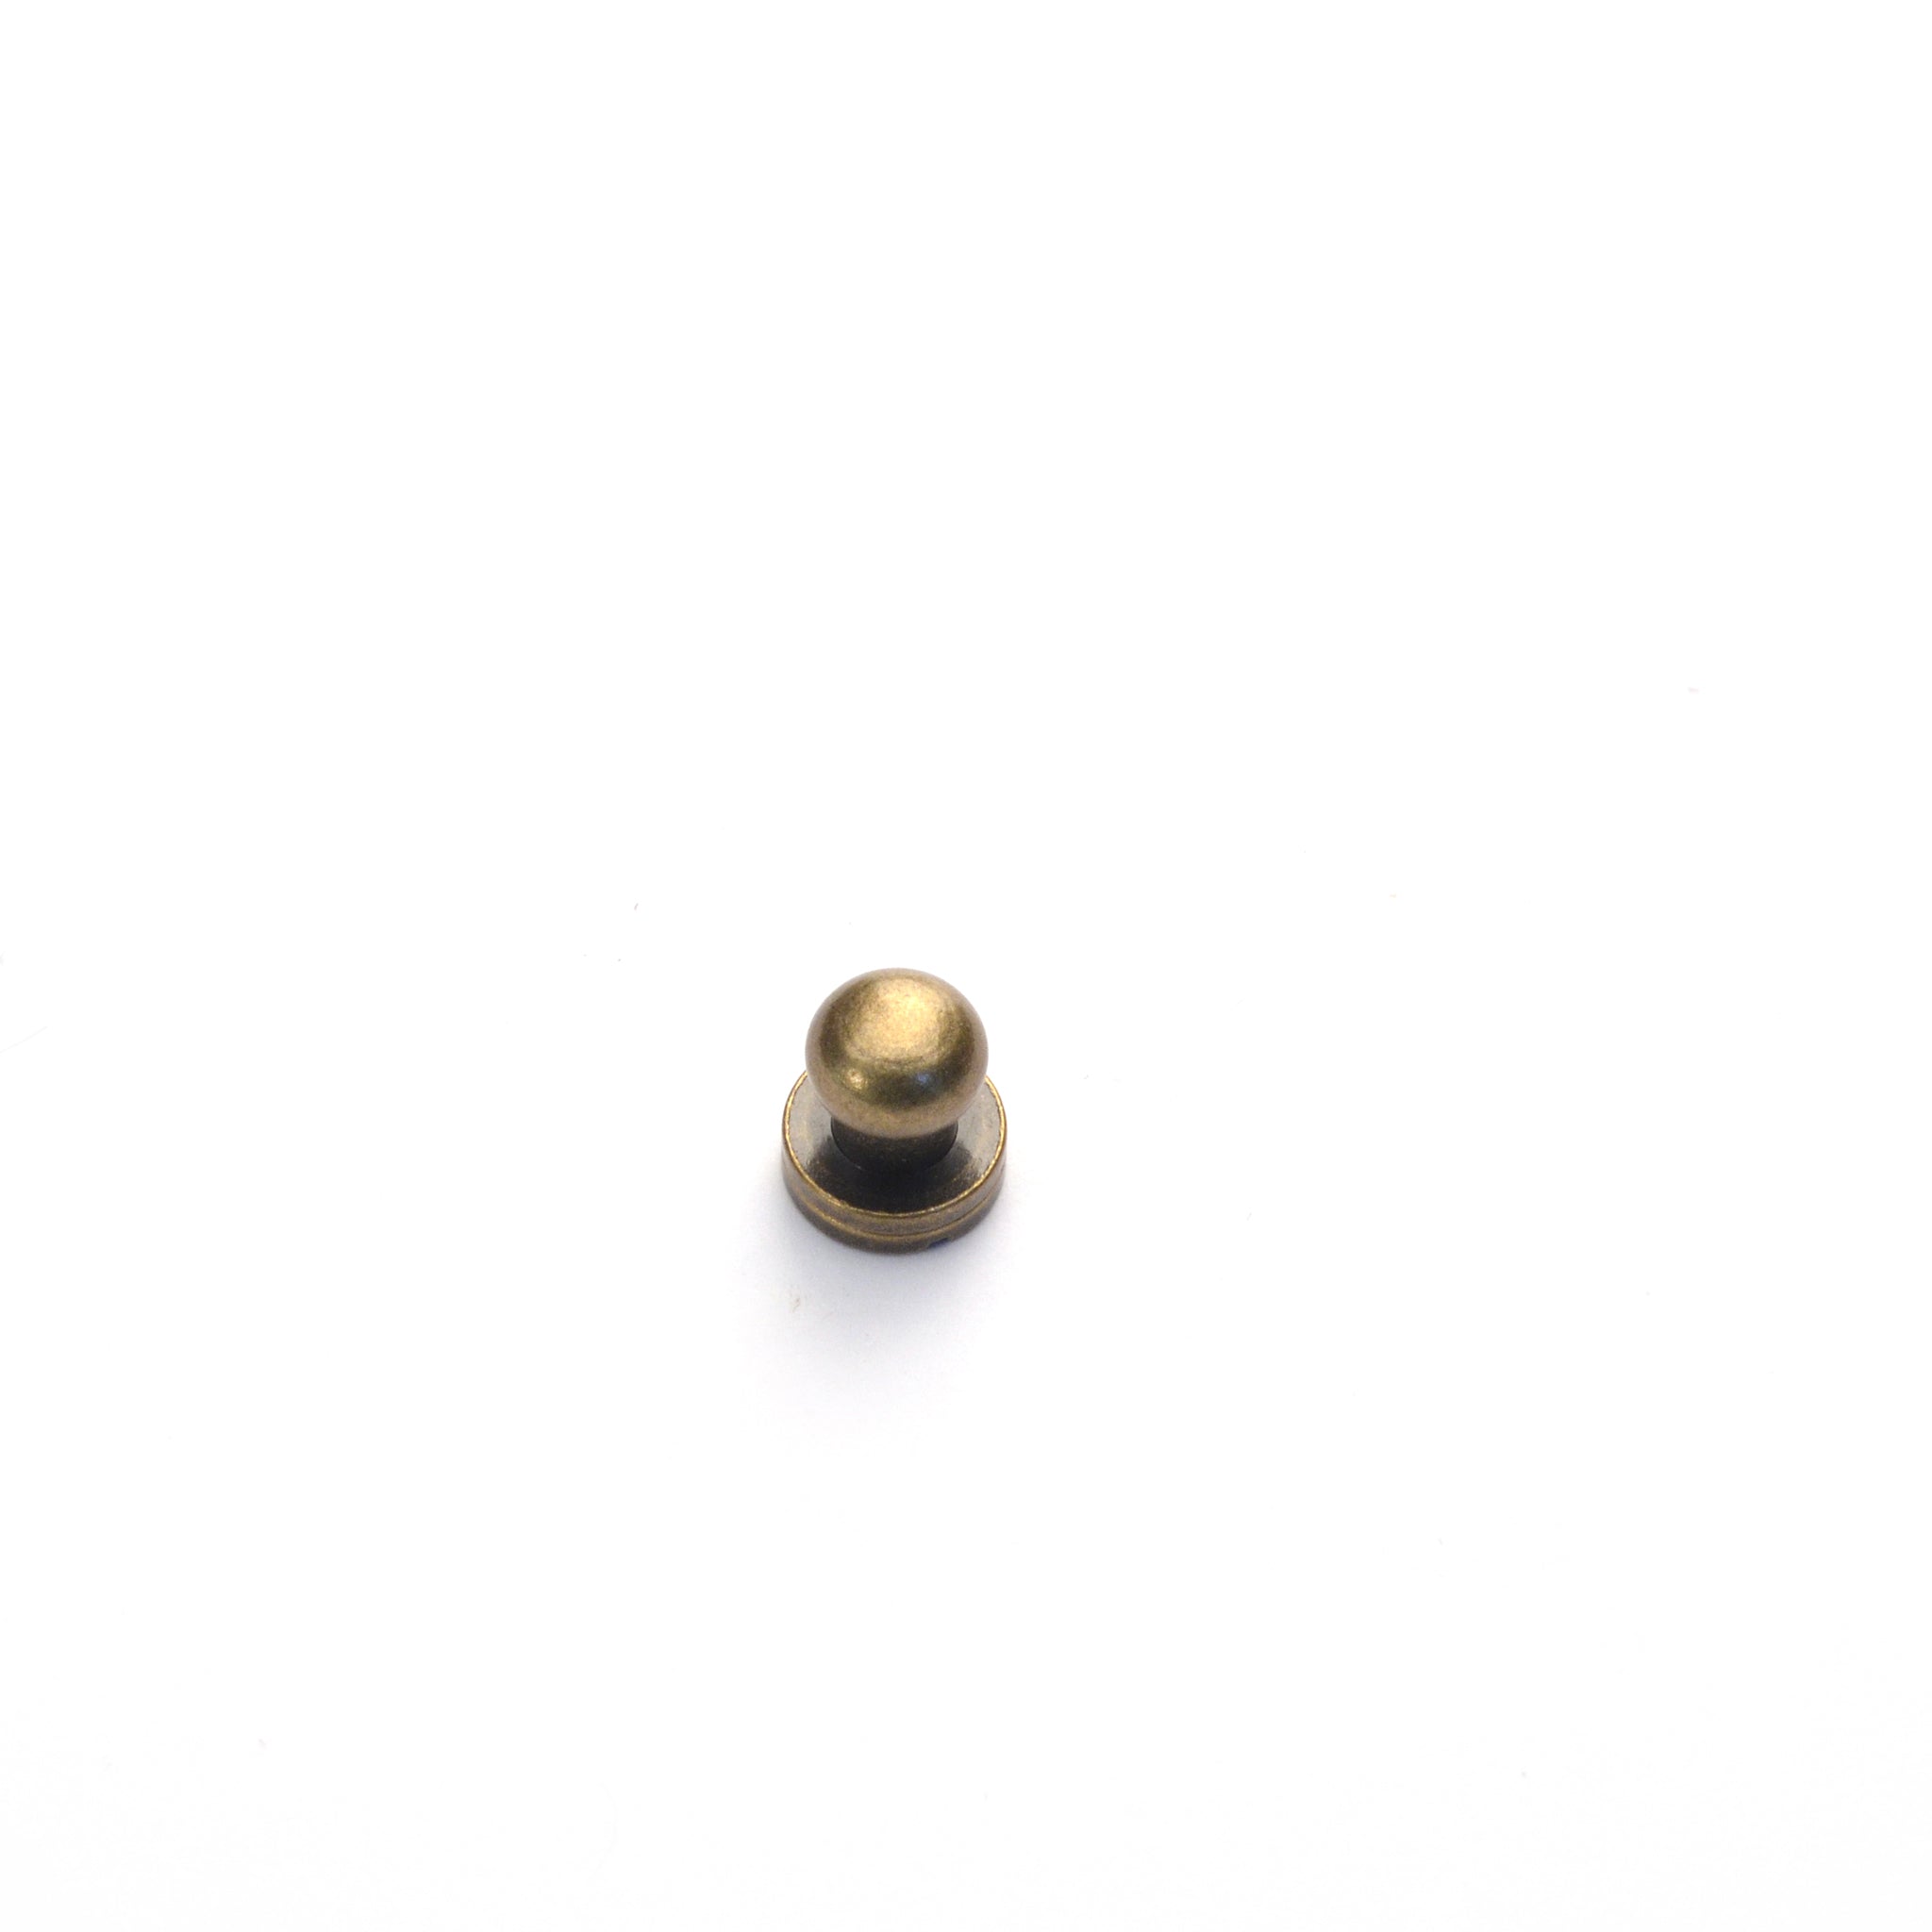 Large Antique Brass Button Stud (Sam Browne) from Identity Leathercraft